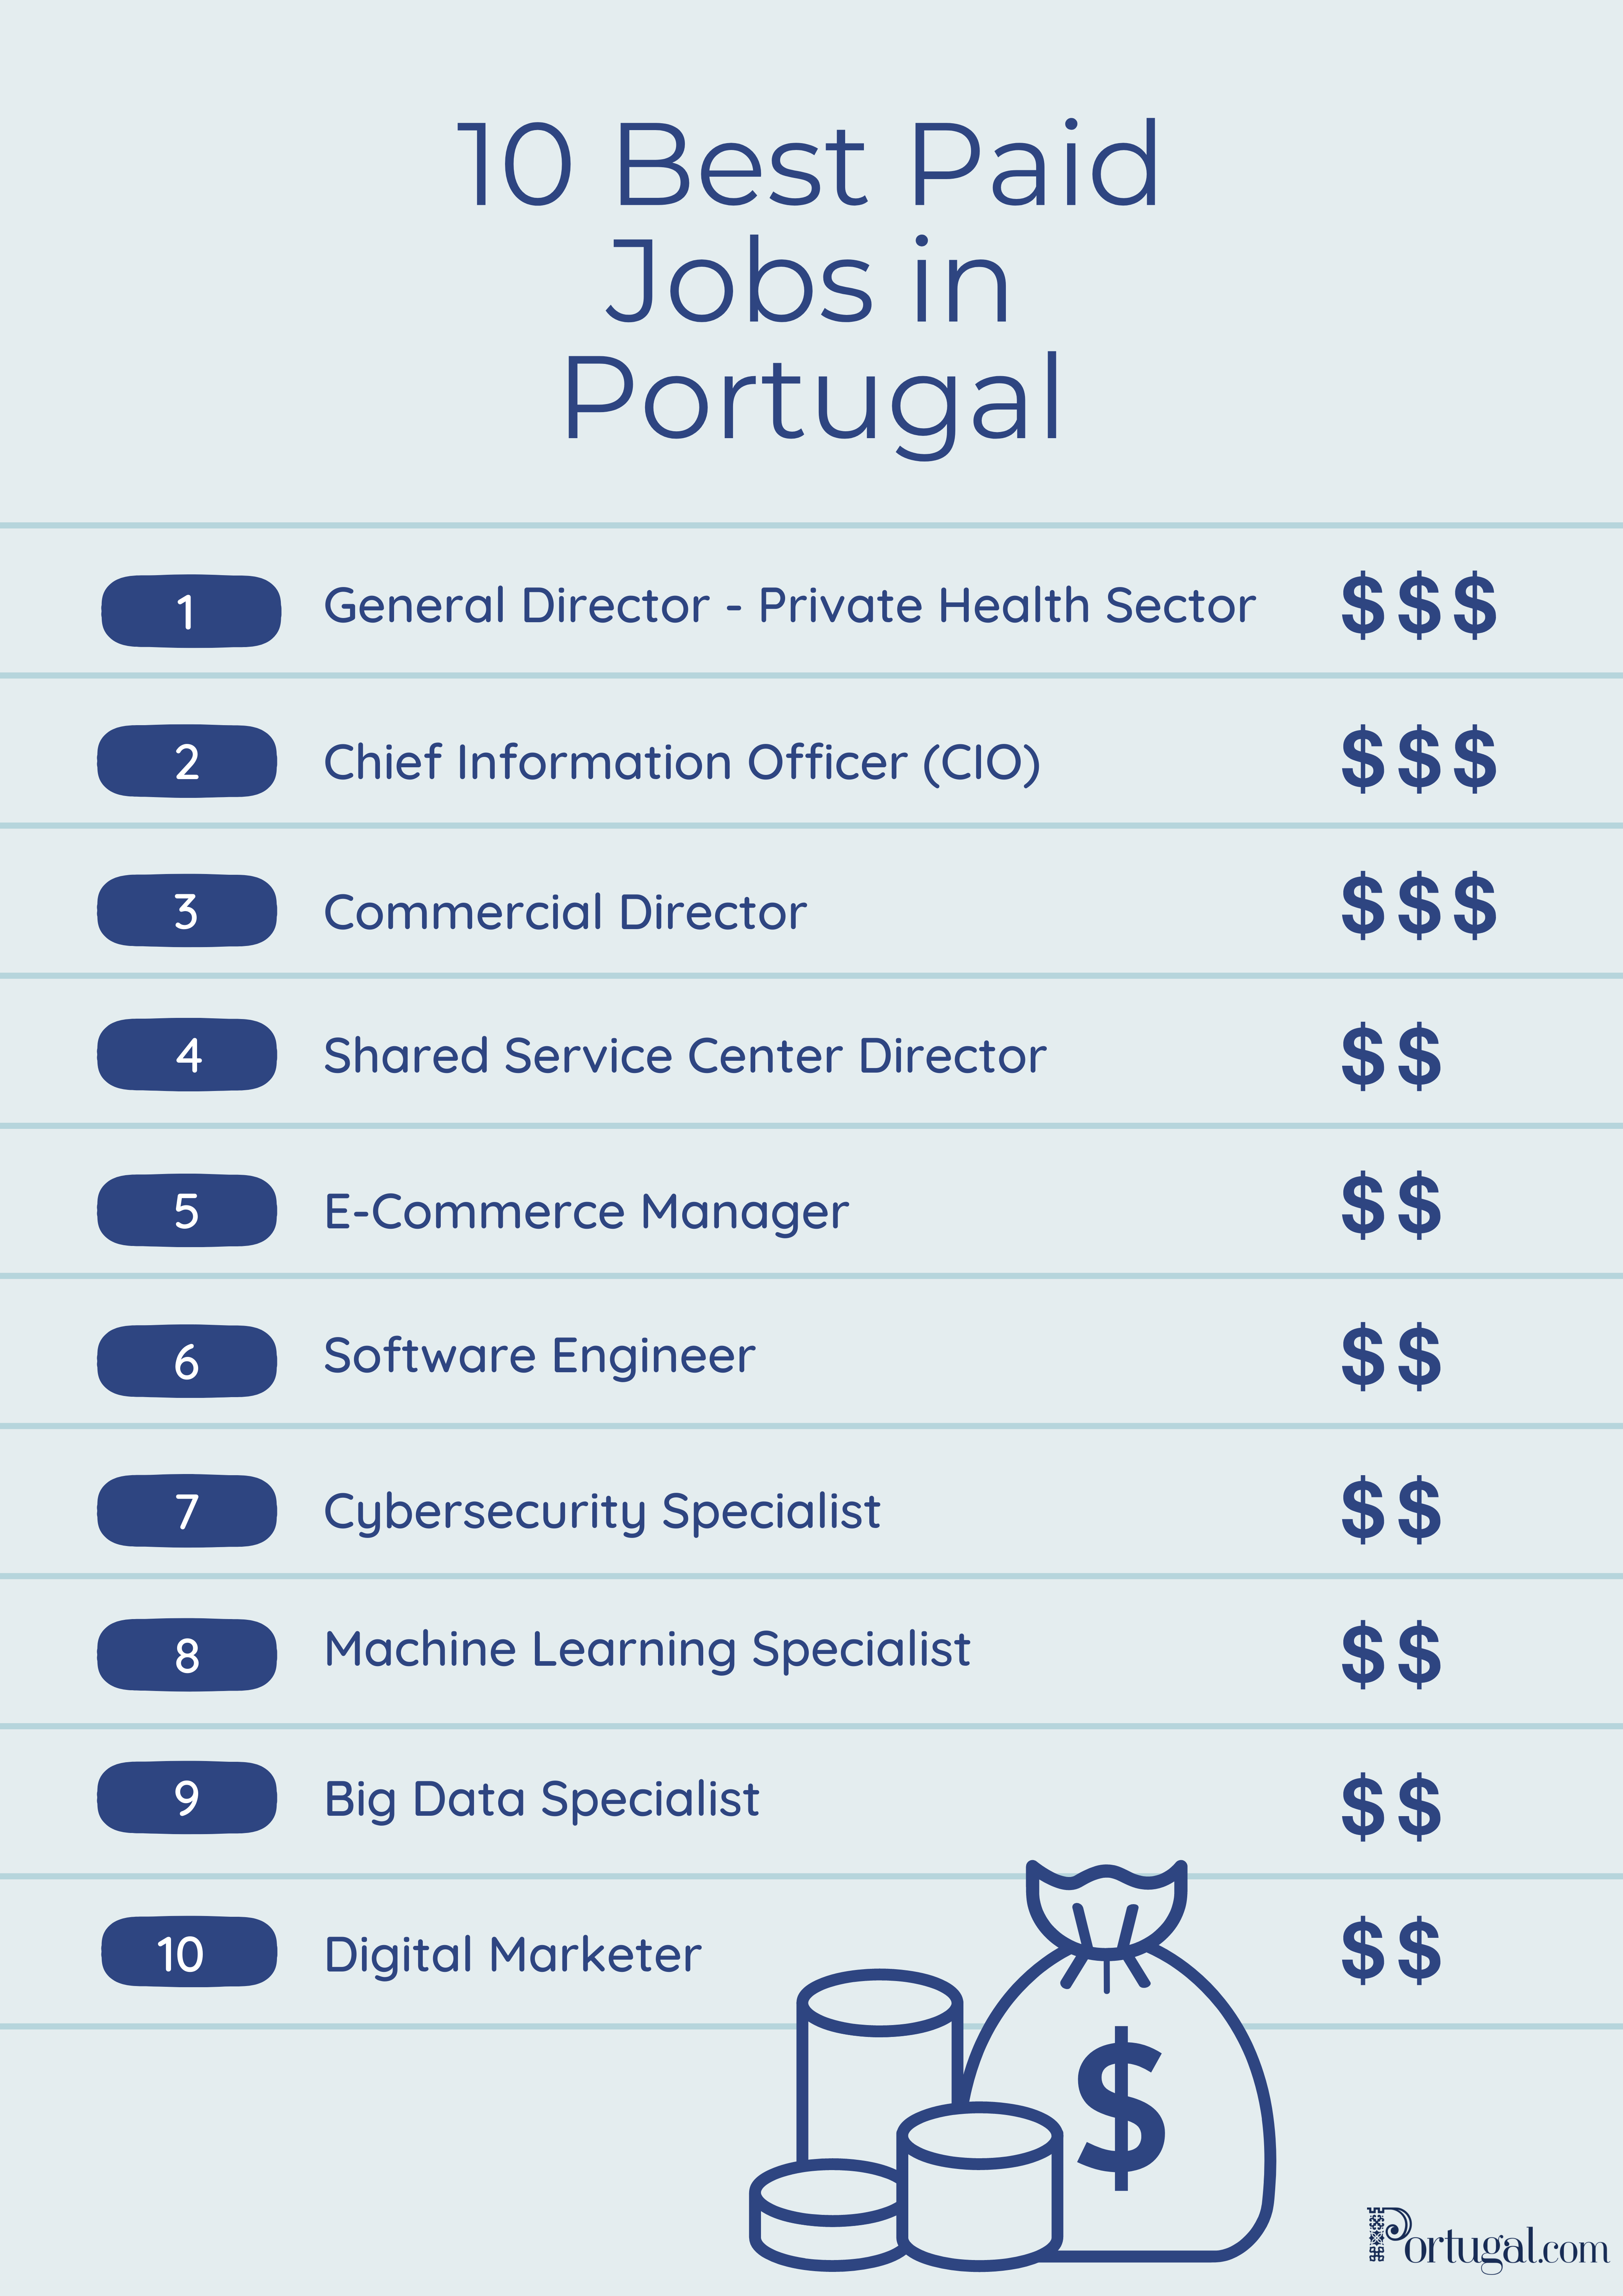 10 Best Paid Jobs in Portugal